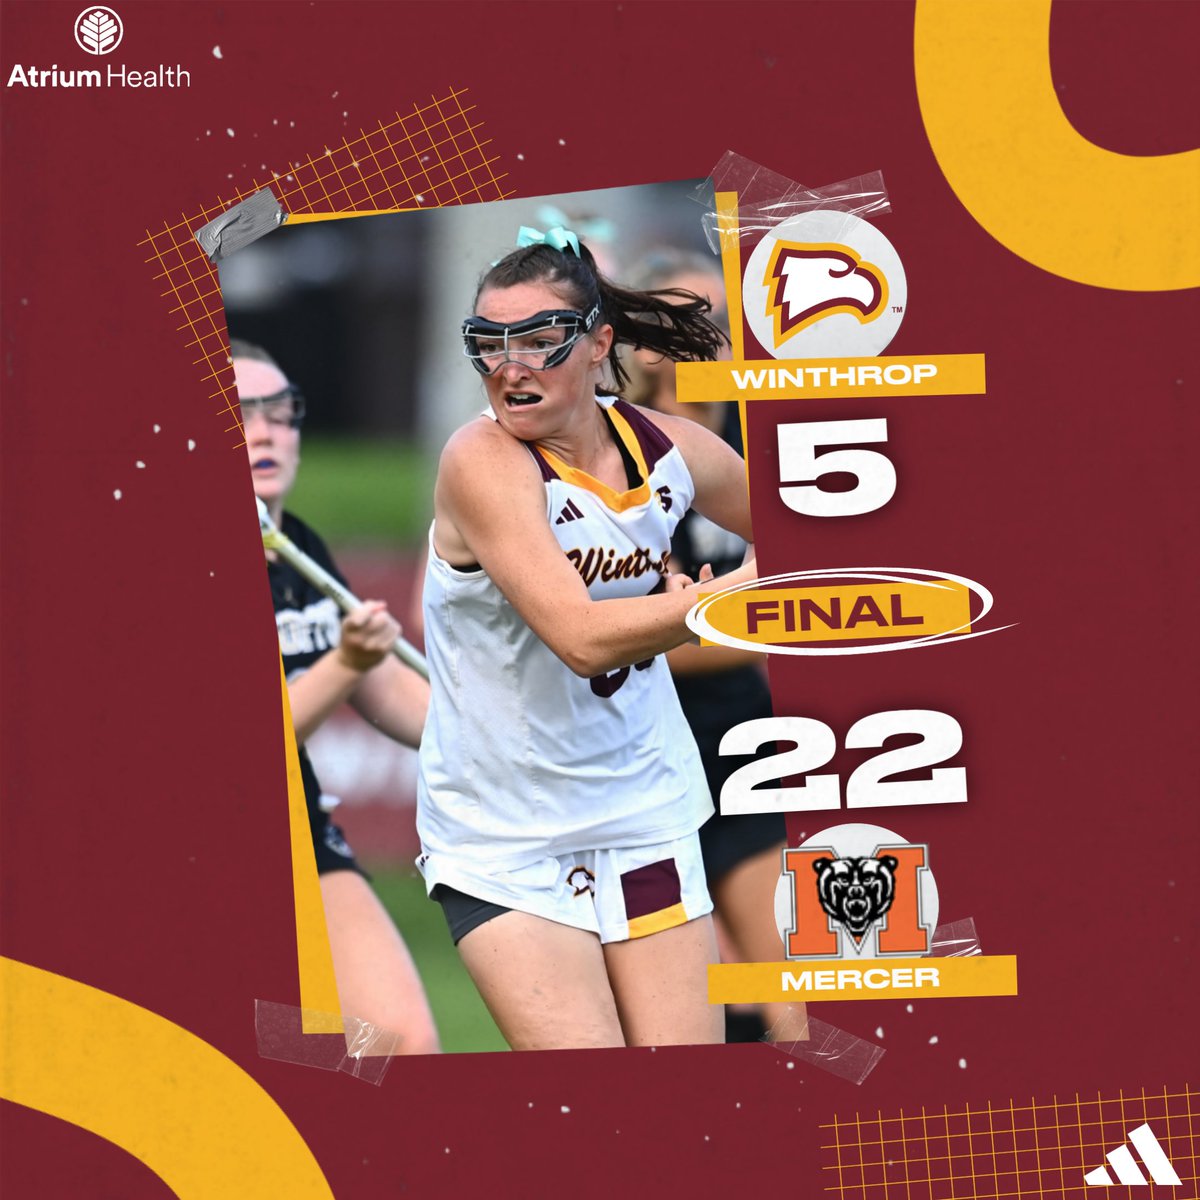 Final from Macon

#ROCKtheHILL | #BigSouthLax